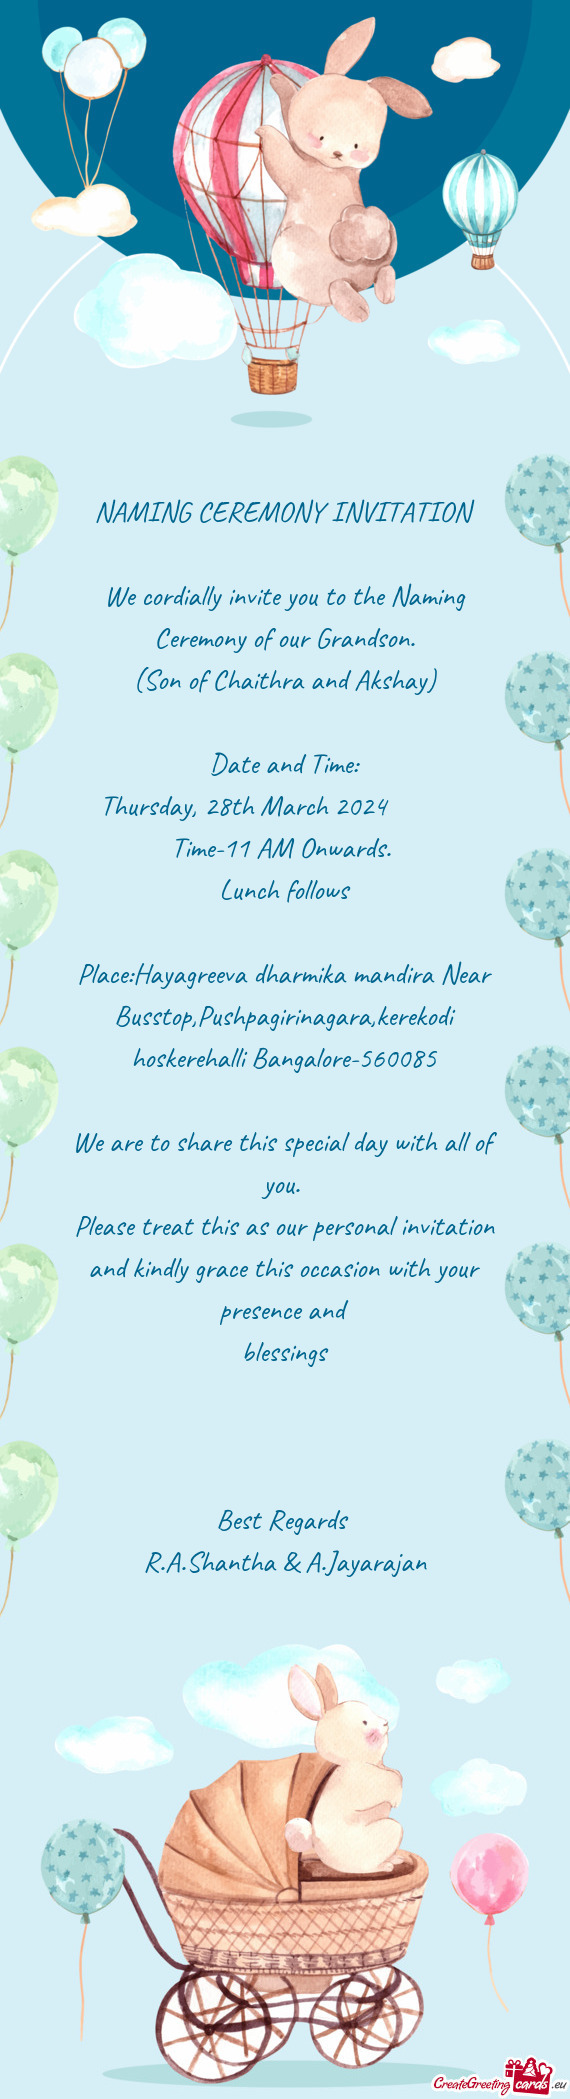 NAMING CEREMONY INVITATION We cordially invite you to the Naming Ceremony of our Grandson